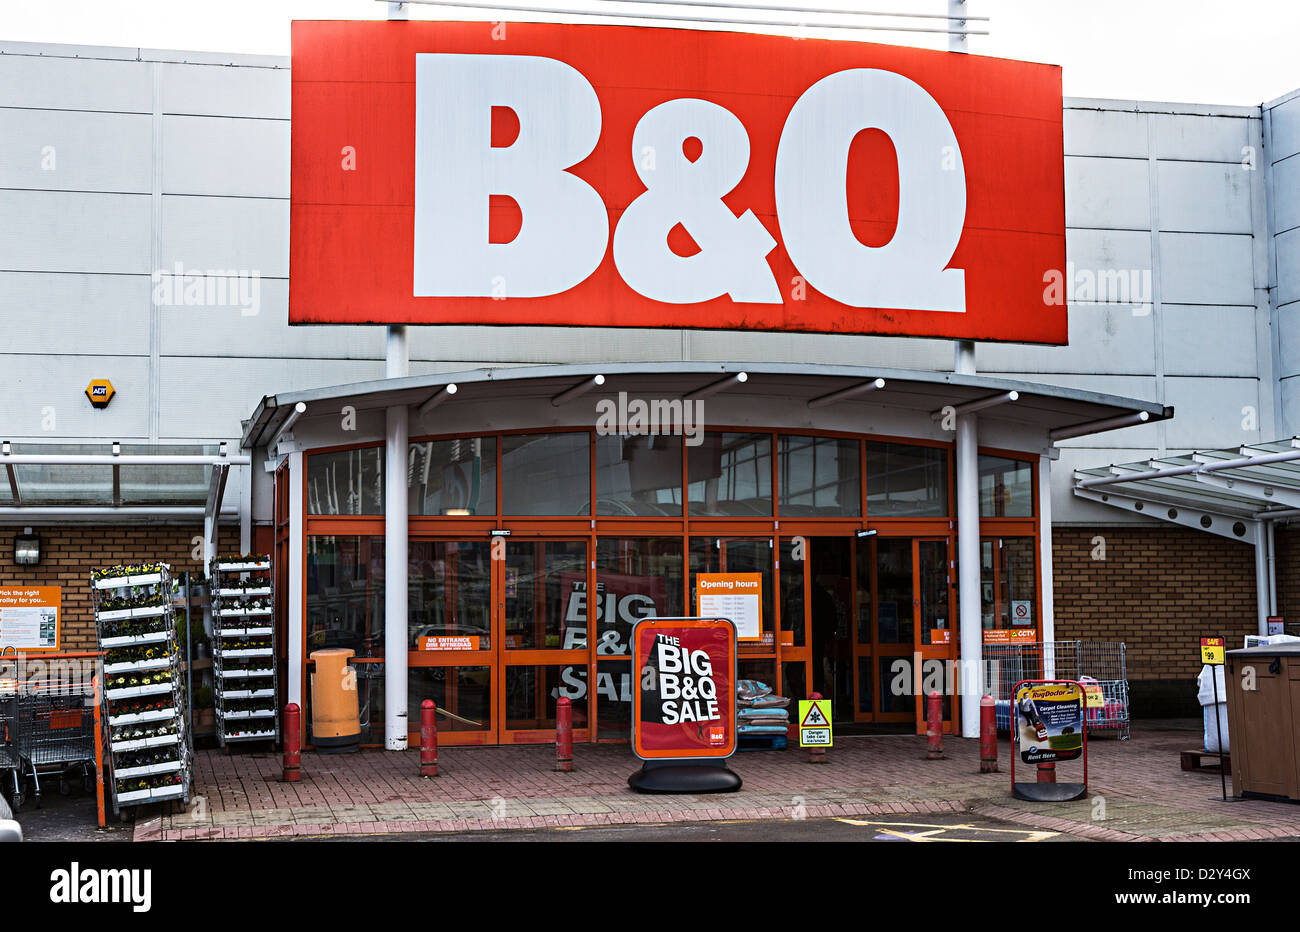 B&Q shop entrance sign with sale, Cwmbran, Wales, UK Stock Photo